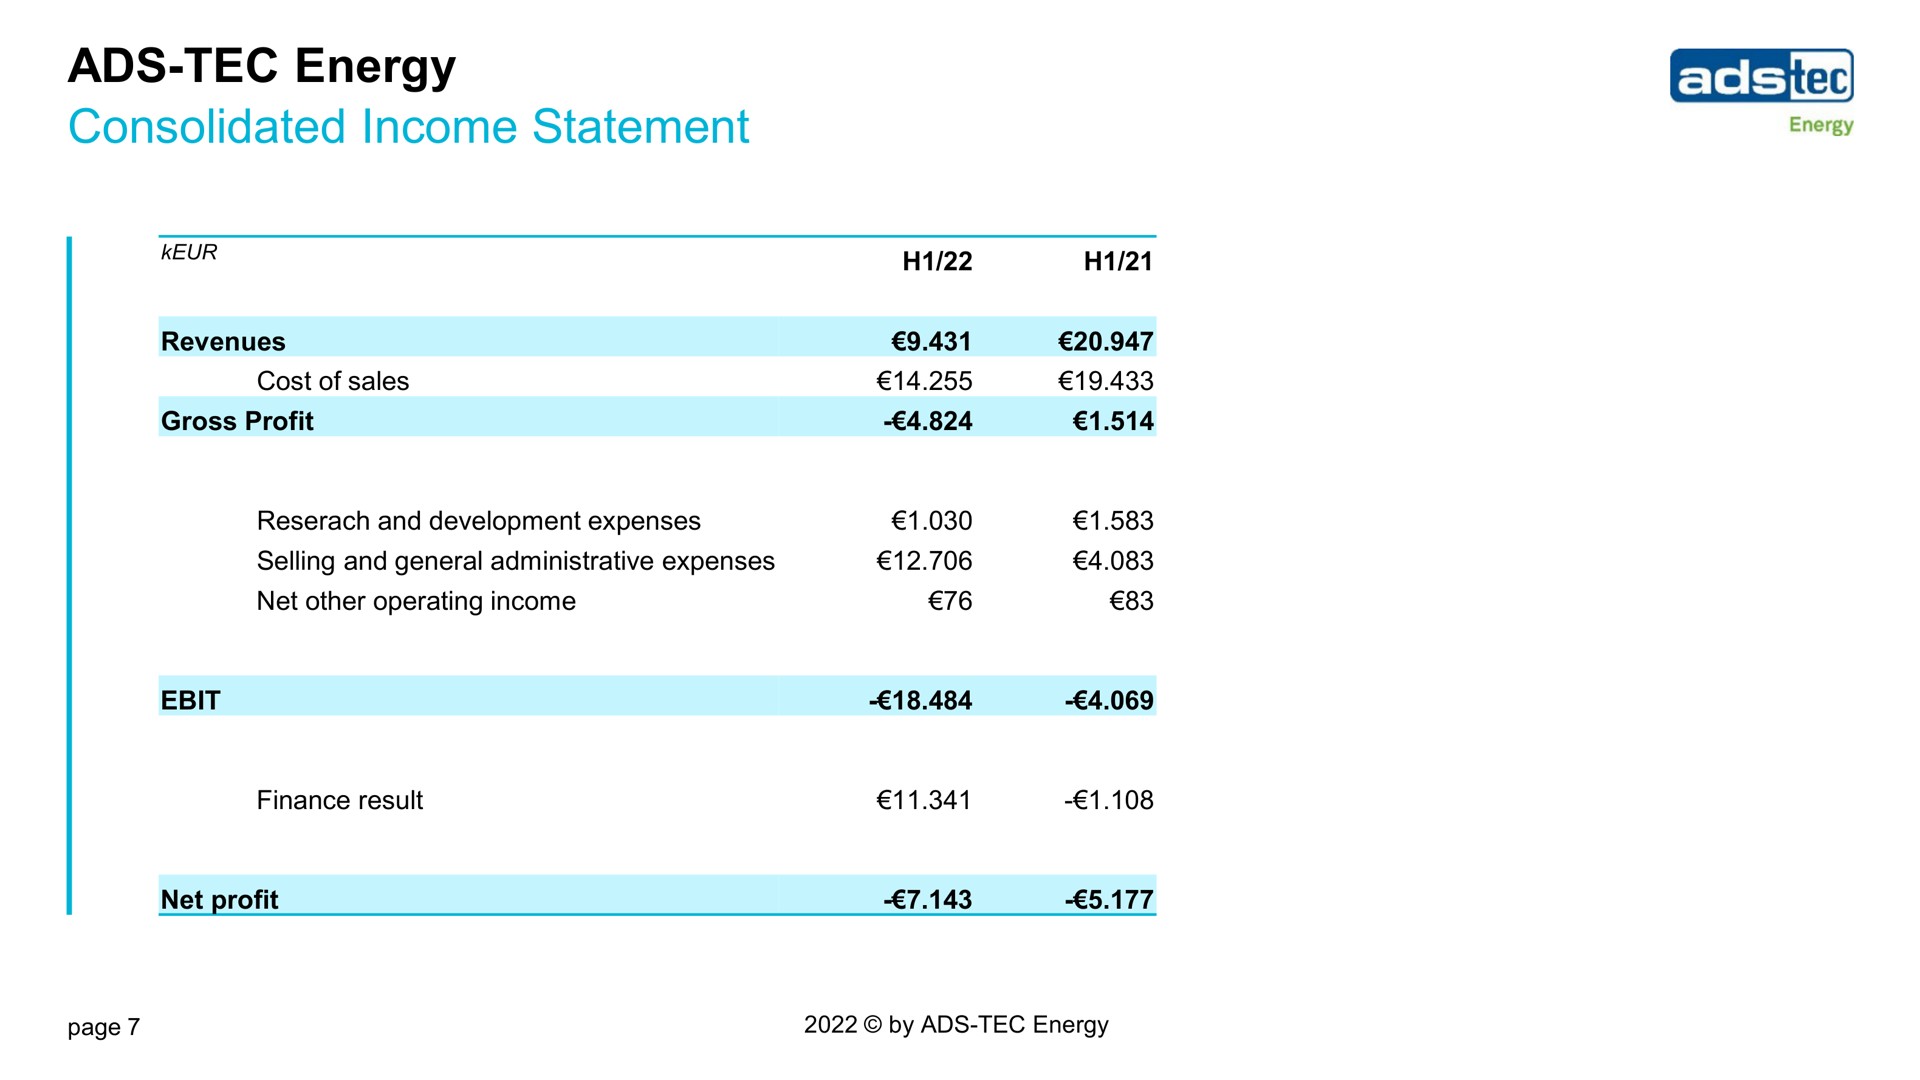 ads tec energy consolidated income statement | ads-tec Energy